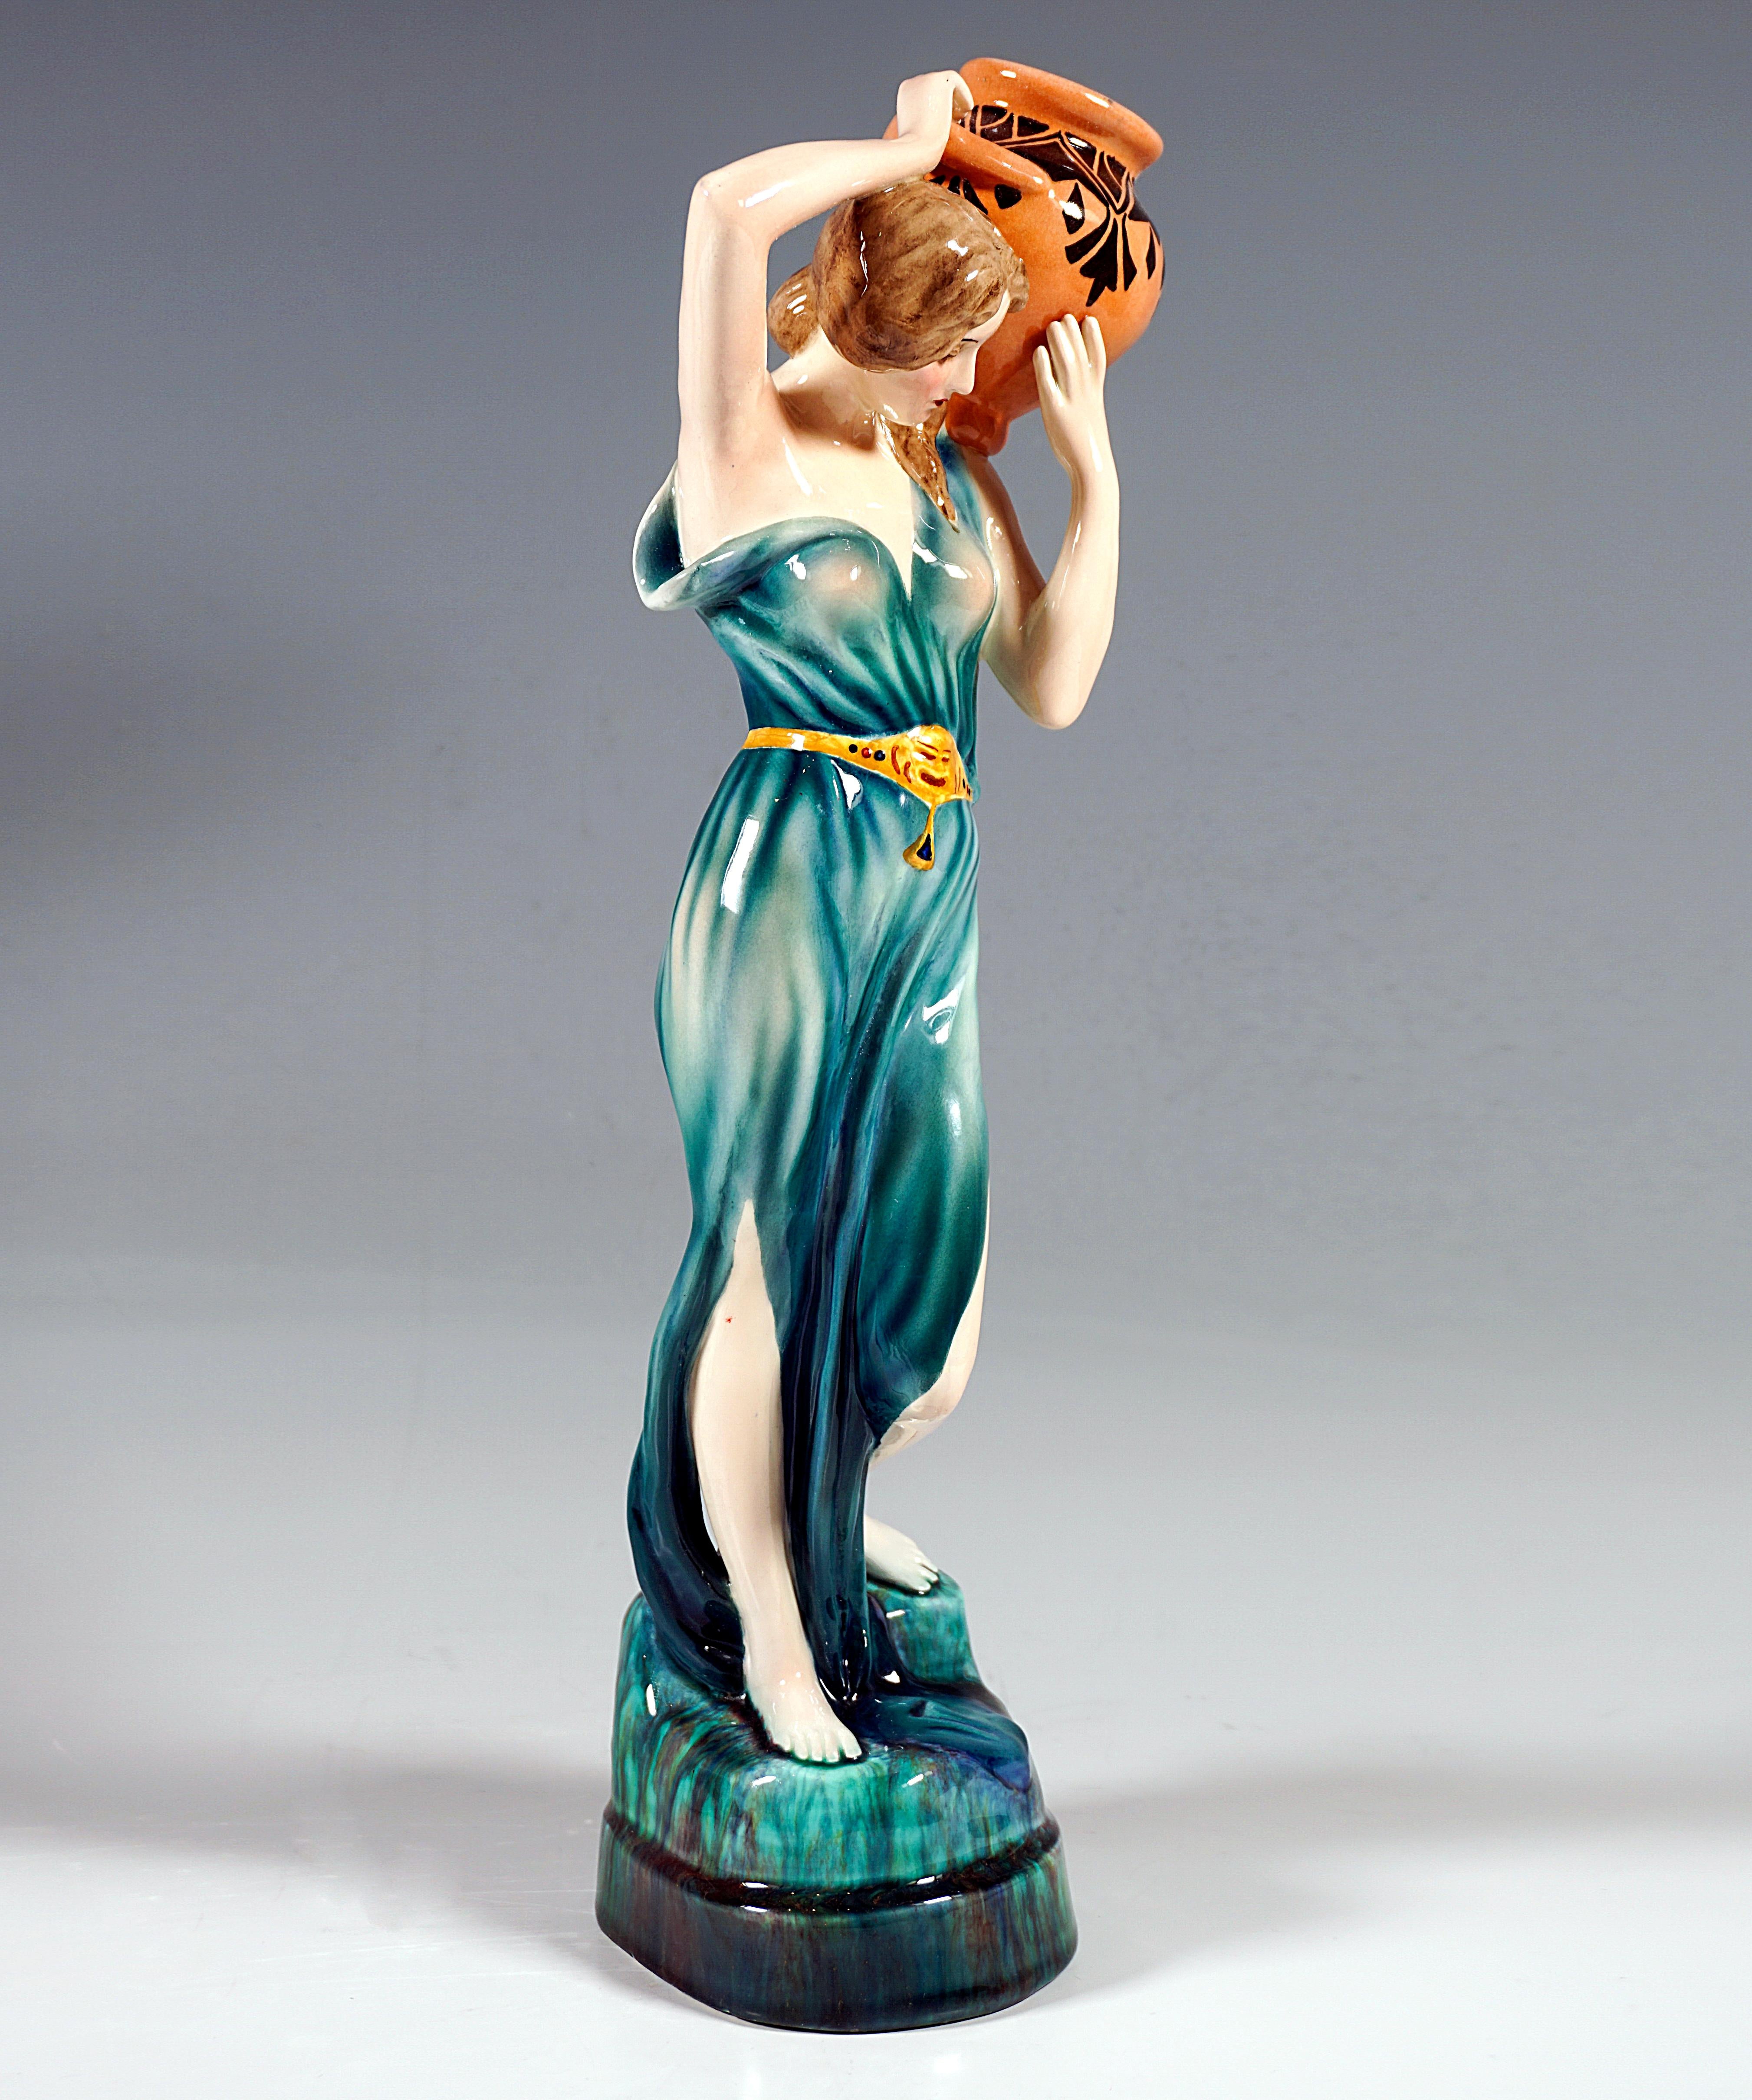 Rare Goldscheider ceramic figurine dating around 1920:
Art Déco execution of an Art Nouveau design around 1902: young lady with her hair tied at the nape of her neck and hanging forward over her shoulders, in a softly falling, transparent turquoise